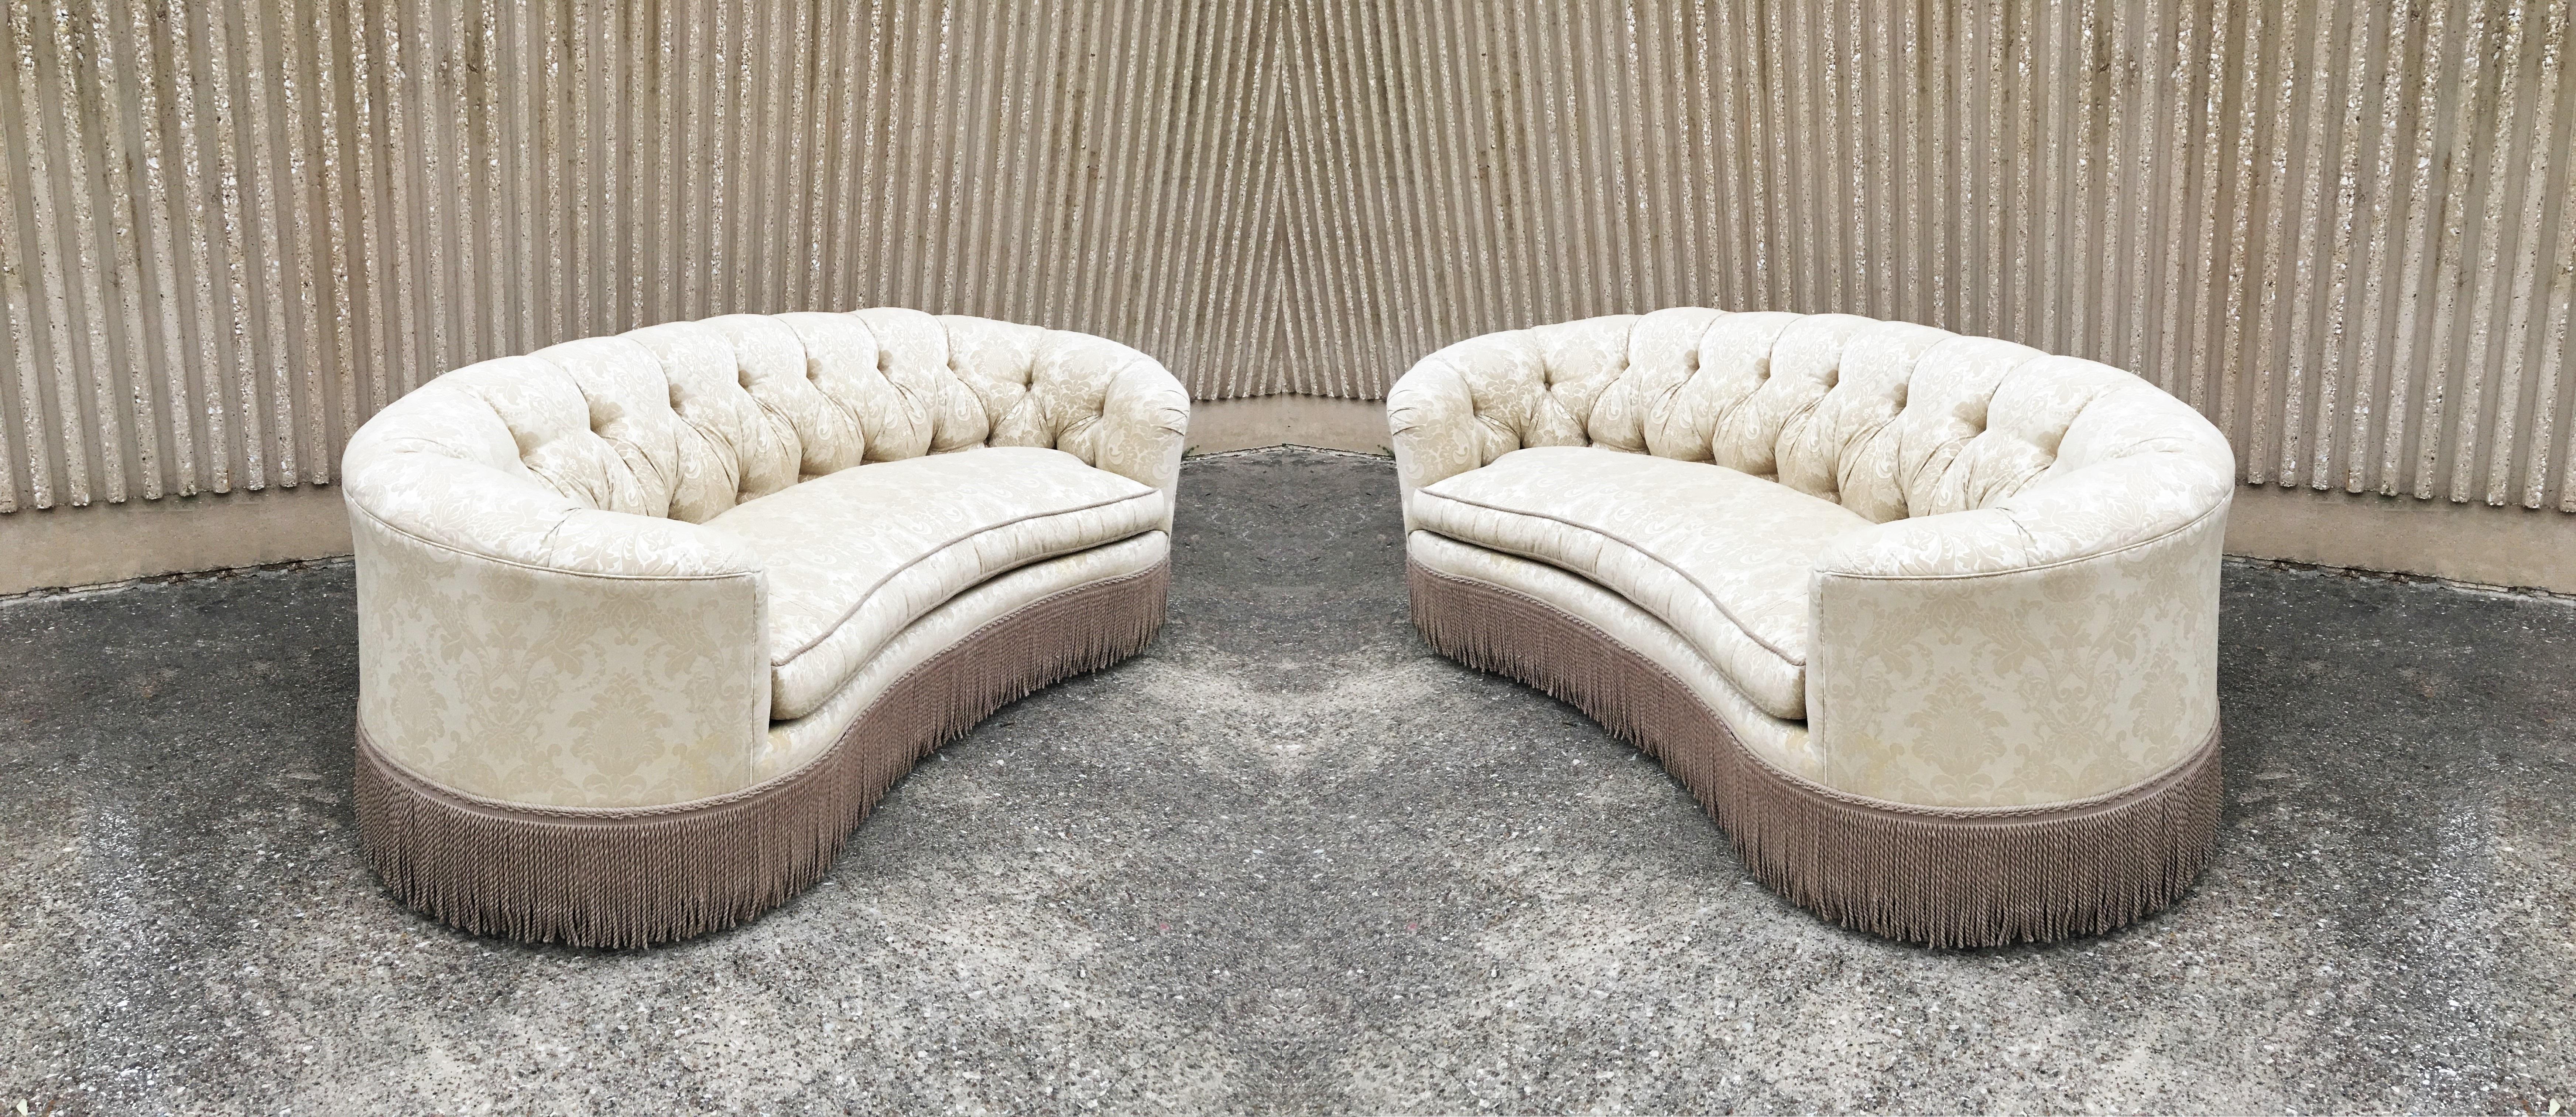 An exceptional pair of vintage kidney bean shaped sofas are the perfect blend of traditional style with modern touch. The sofas have curved backs and a thick body, the clean seat cushions complement the thick texture of the tufted back that flow